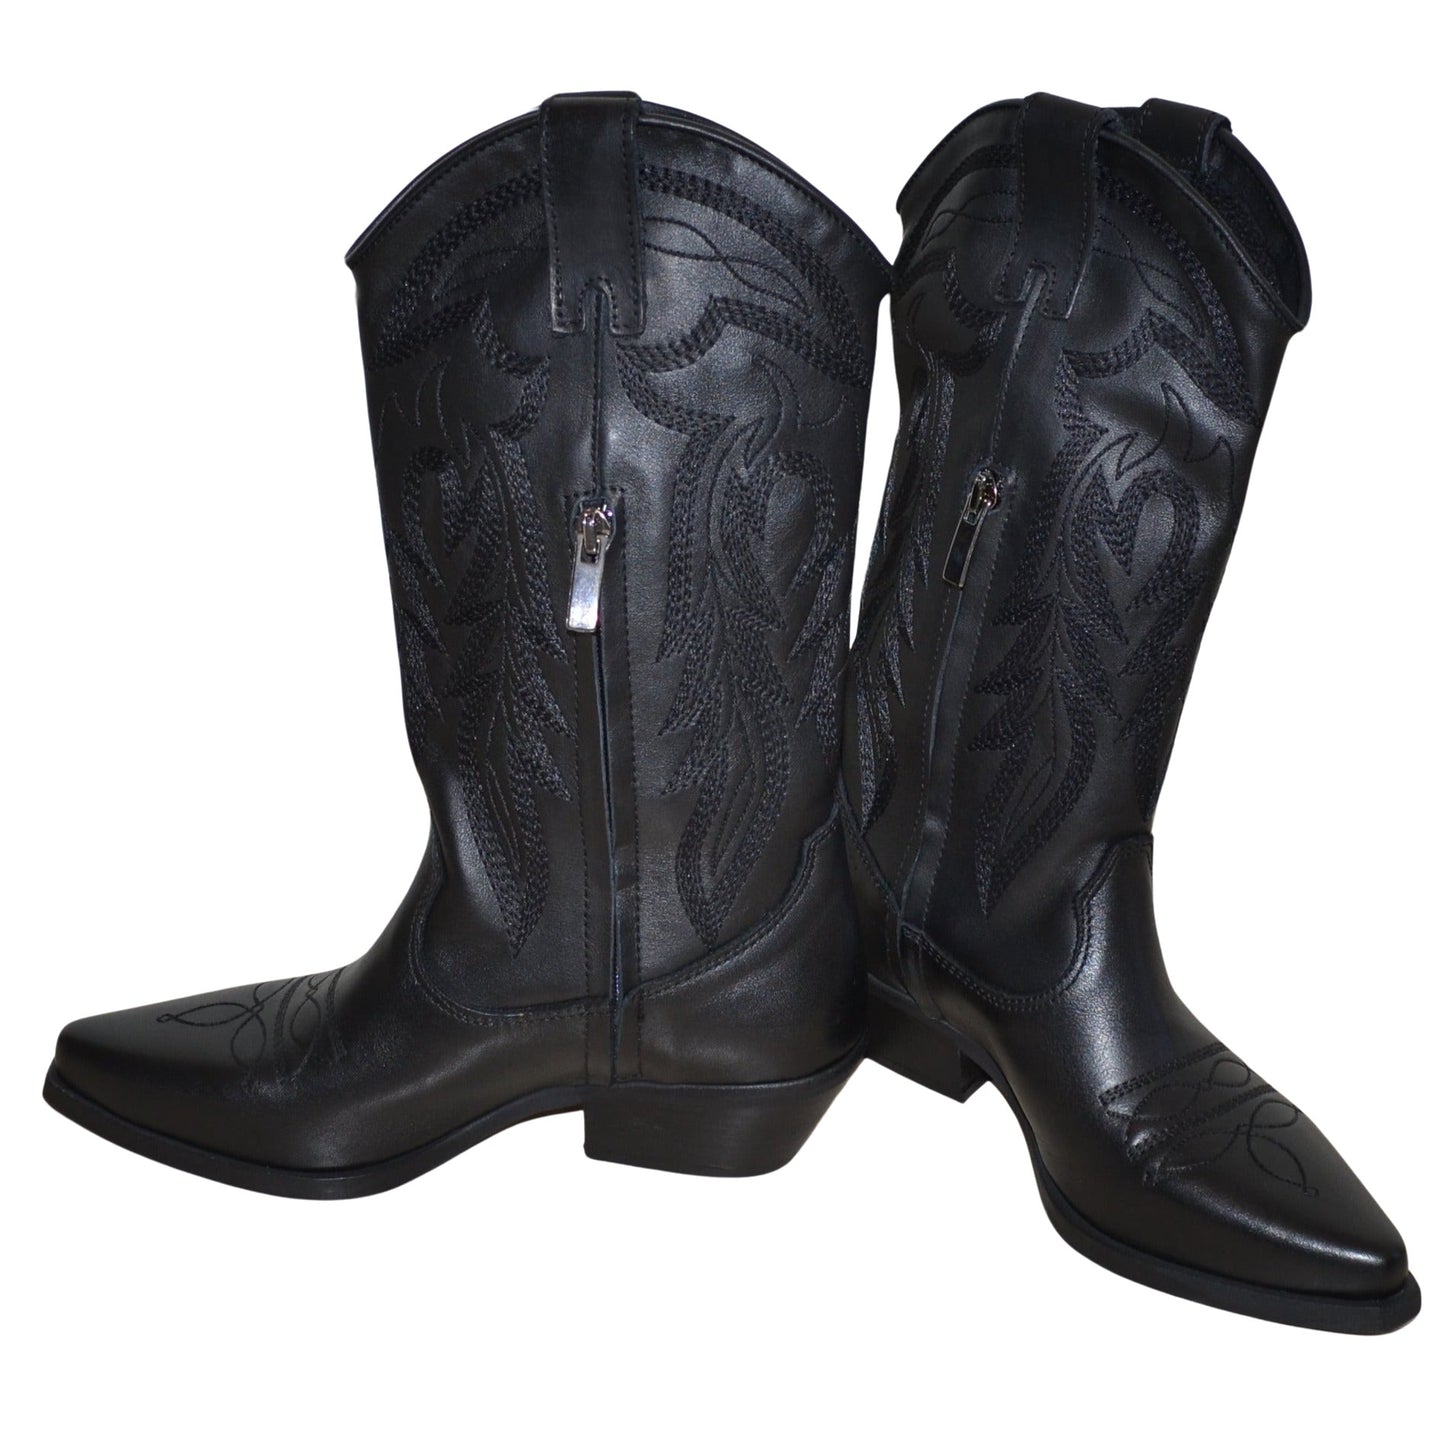 Vertice texani women black leather Made in Italy